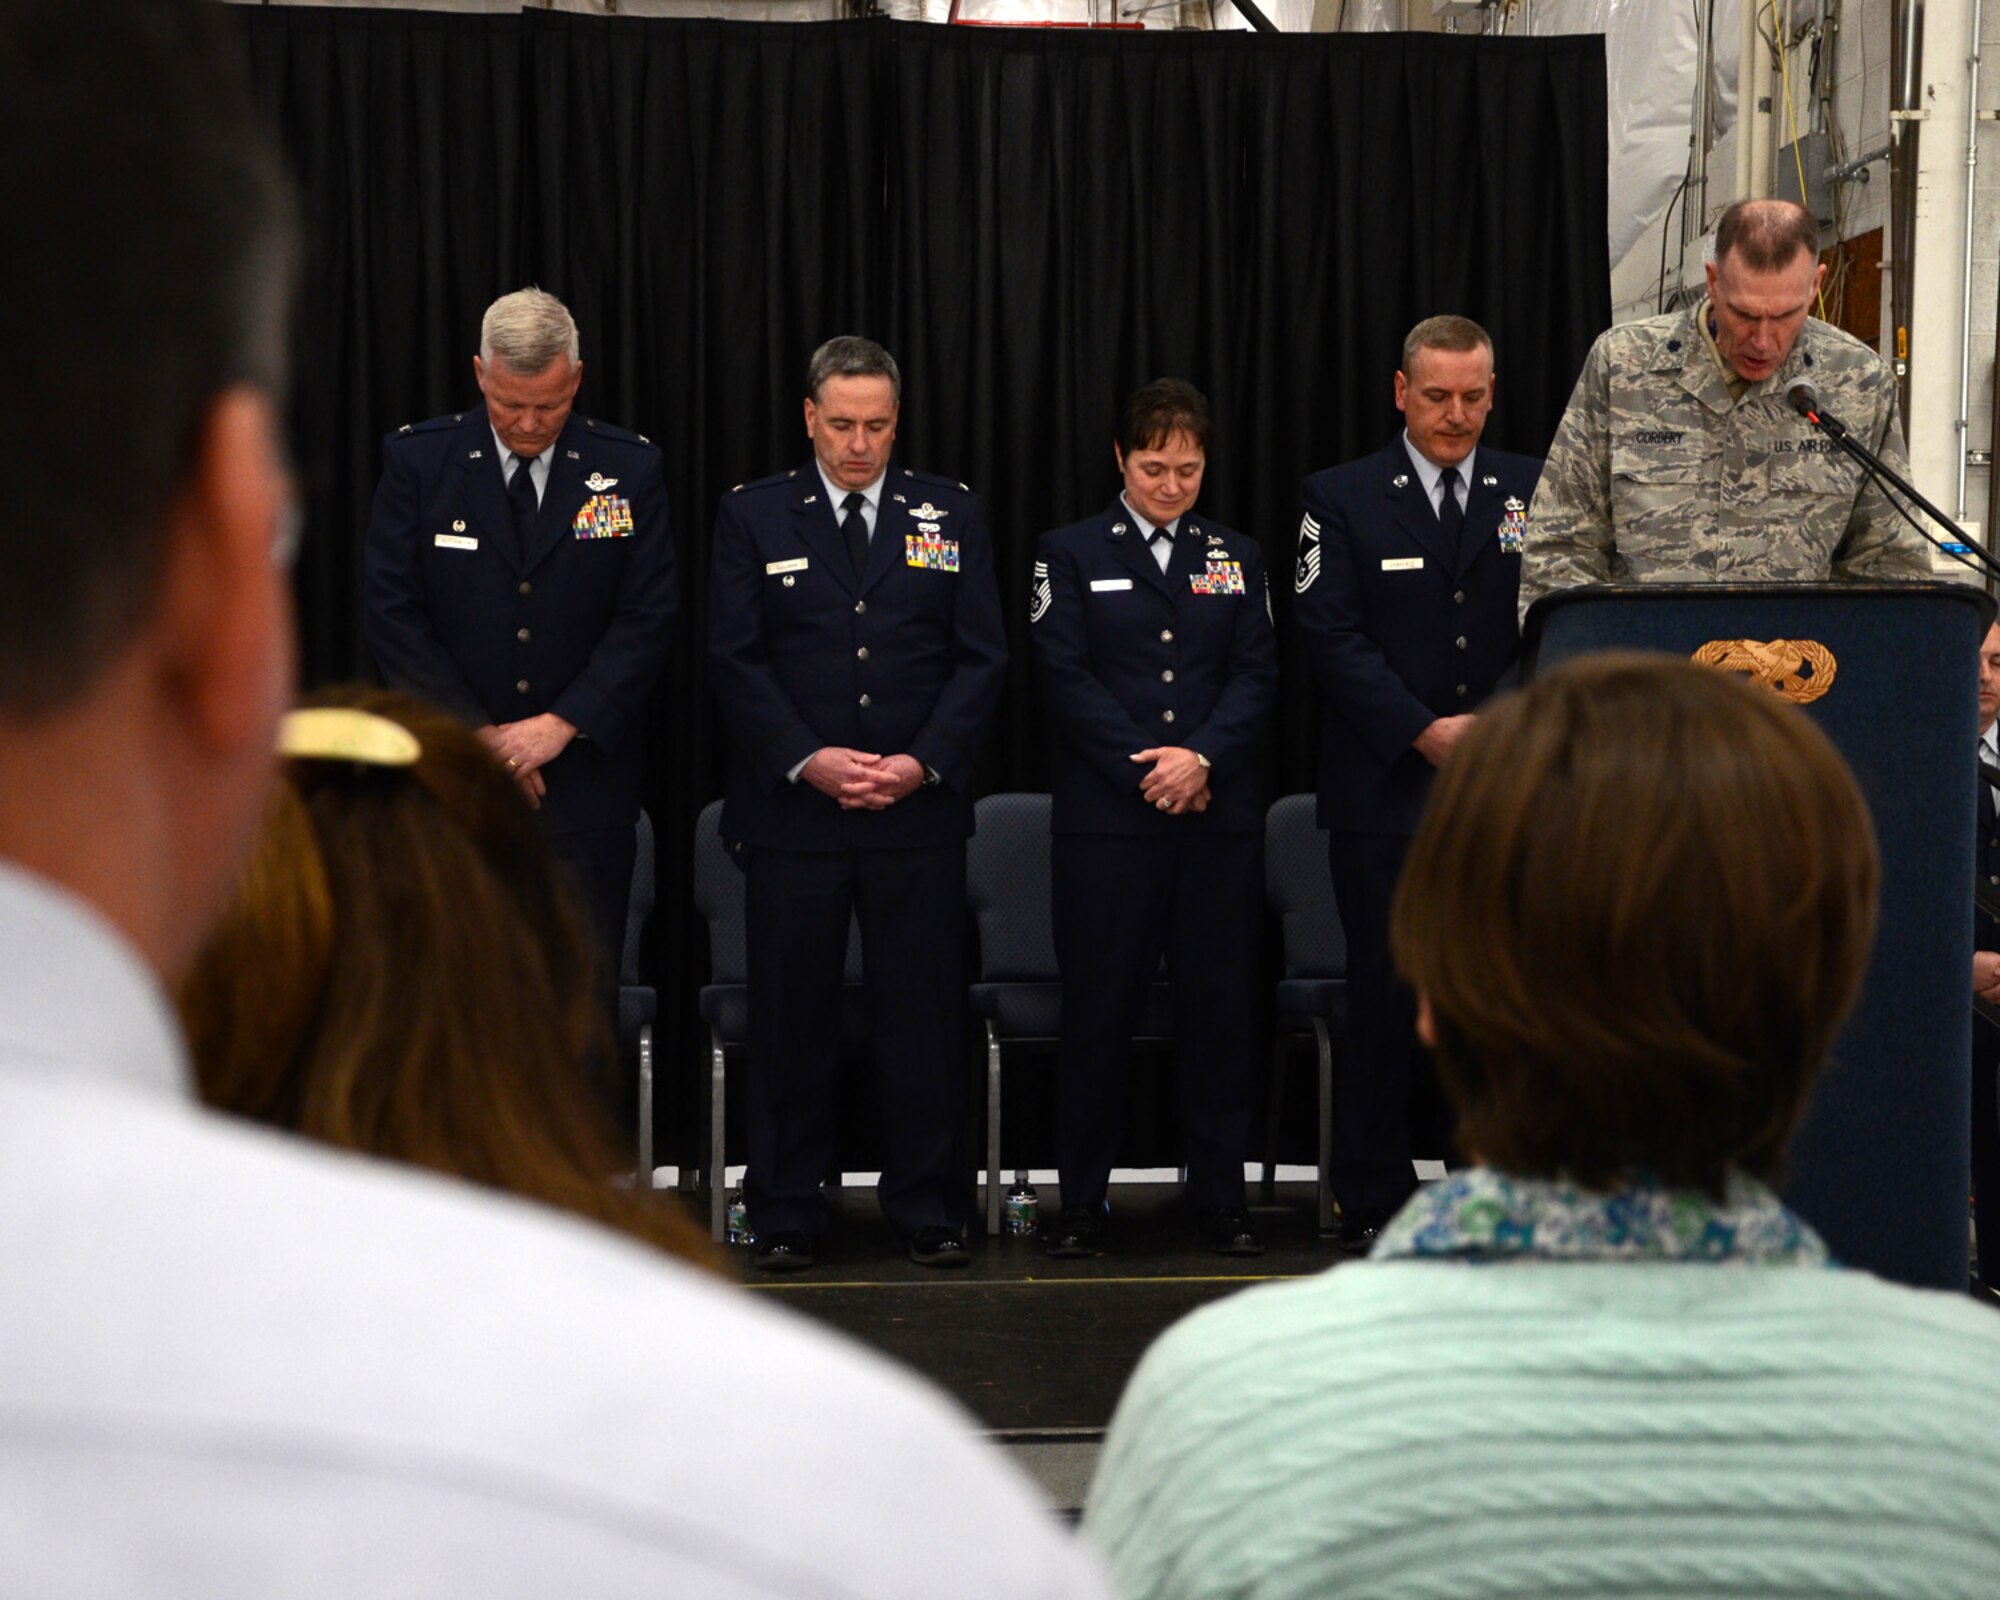 PEASE AIR NATIONAL GUARD BASE, N.H. -- Chaplain Robert J. Cordery delivers the invocation during the 157th Air Refueling Wing Change of Authority Ceremony in Hanger 254 as (left to right) Col. Paul Hutchinson, 157th Air Refueling Wing commander; Col. Peter Sullivan, 157th Air Refueling Wing vice commander; Command Chief Master Sgt. Brenda Blonigen; and incoming Command Chief Master Sgt. Jamie Lawrence look on. Lawrence replaces Chief Master Sgt. Brenda Blonigen who served in the position for more than five years. Lawrence previous role was as the 66th Force Support Squadron superintendent. (N.H. National Guard photo by Tech. Sgt. Mark Wyatt/RELEASED)